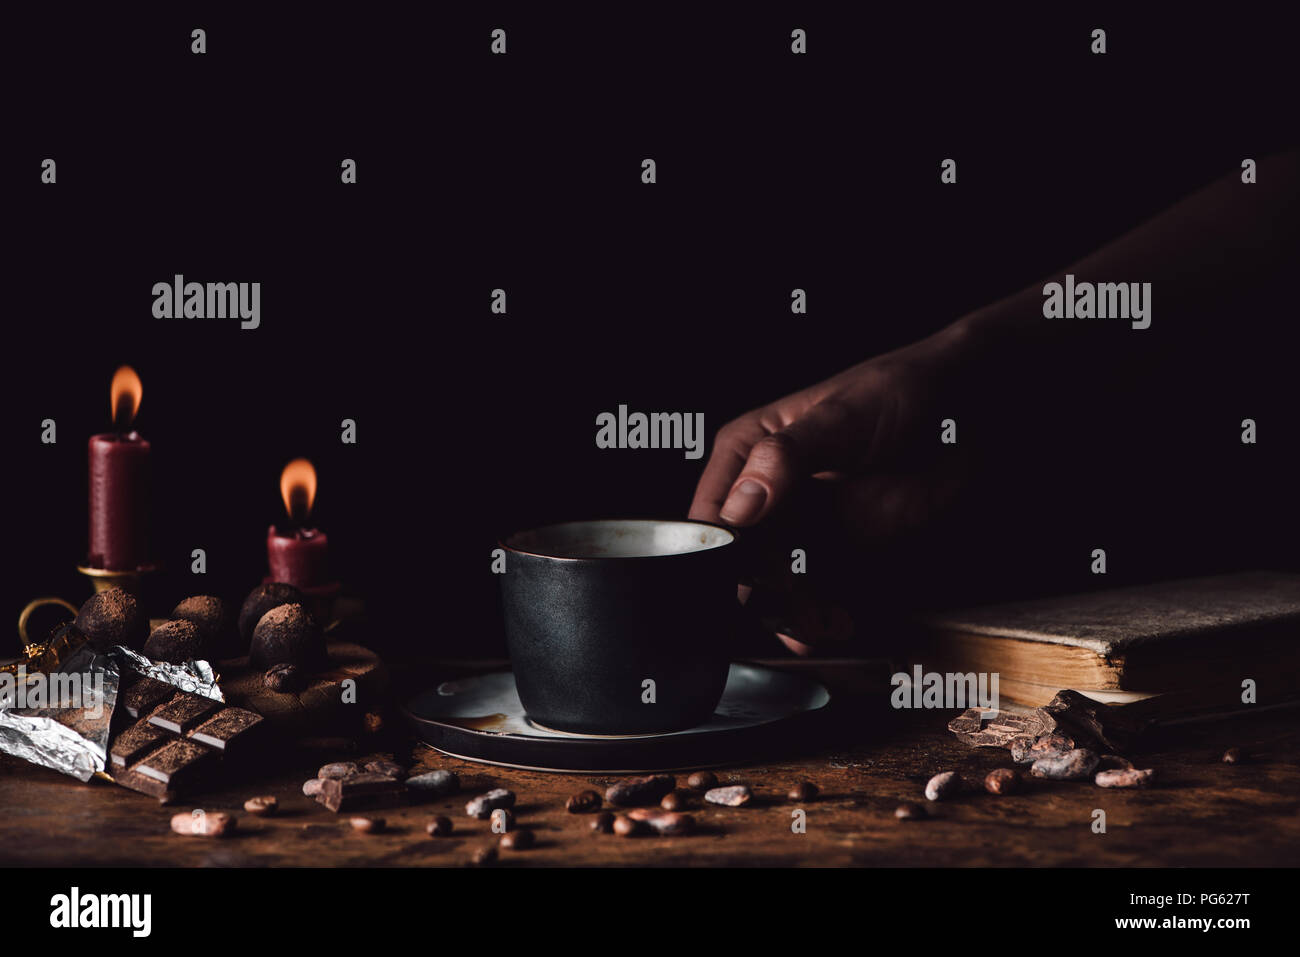 partial view of woman holding cup of coffee at wooden table with chocolate, truffles, coffee grains, candles and book on black background Stock Photo